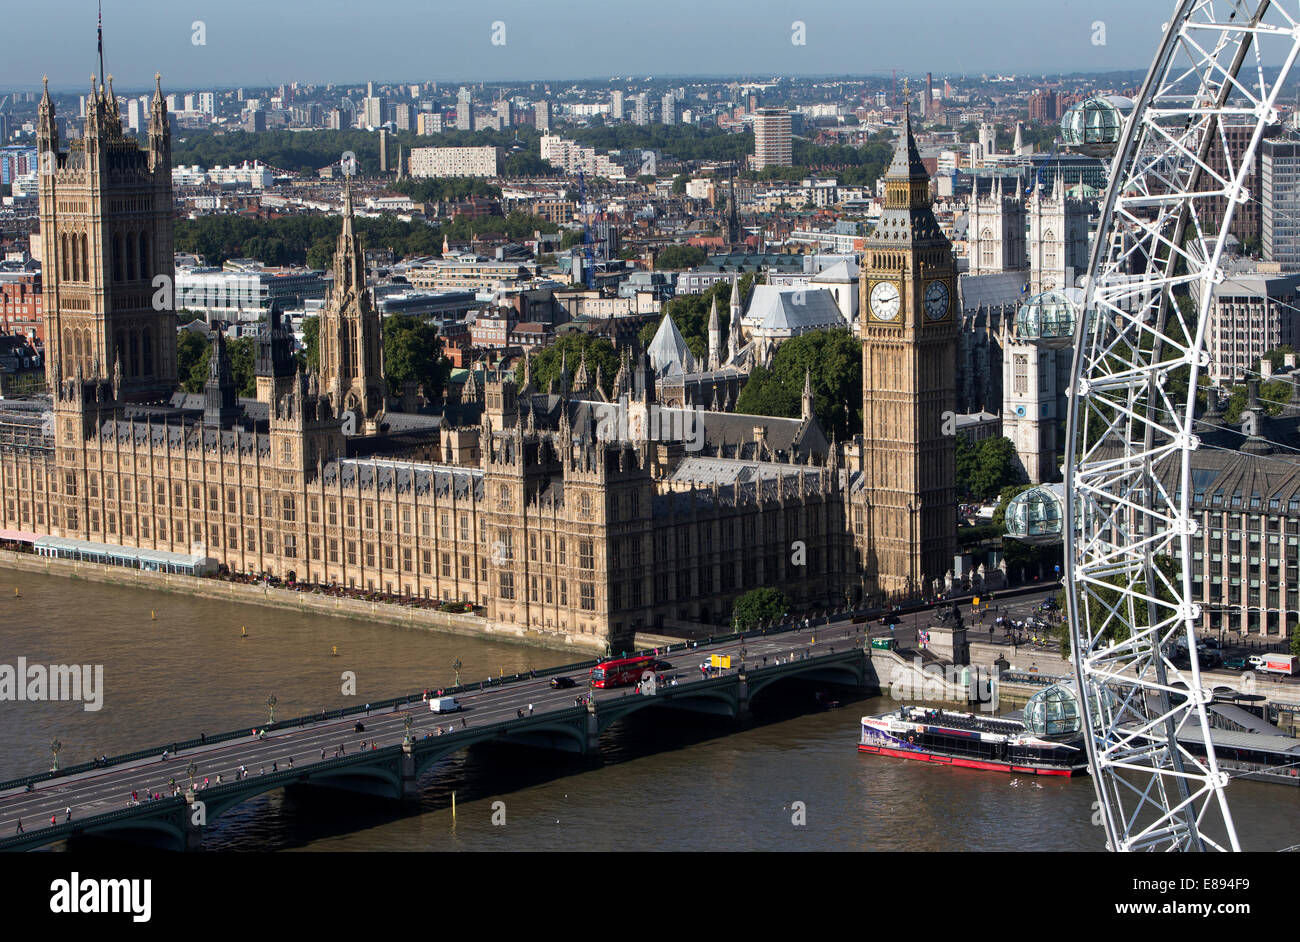 The Houses of Parliament-The Palace of Westminster-The Elizabeth Tower with Big Ben,The House of Commons and the House of Lords Stock Photo